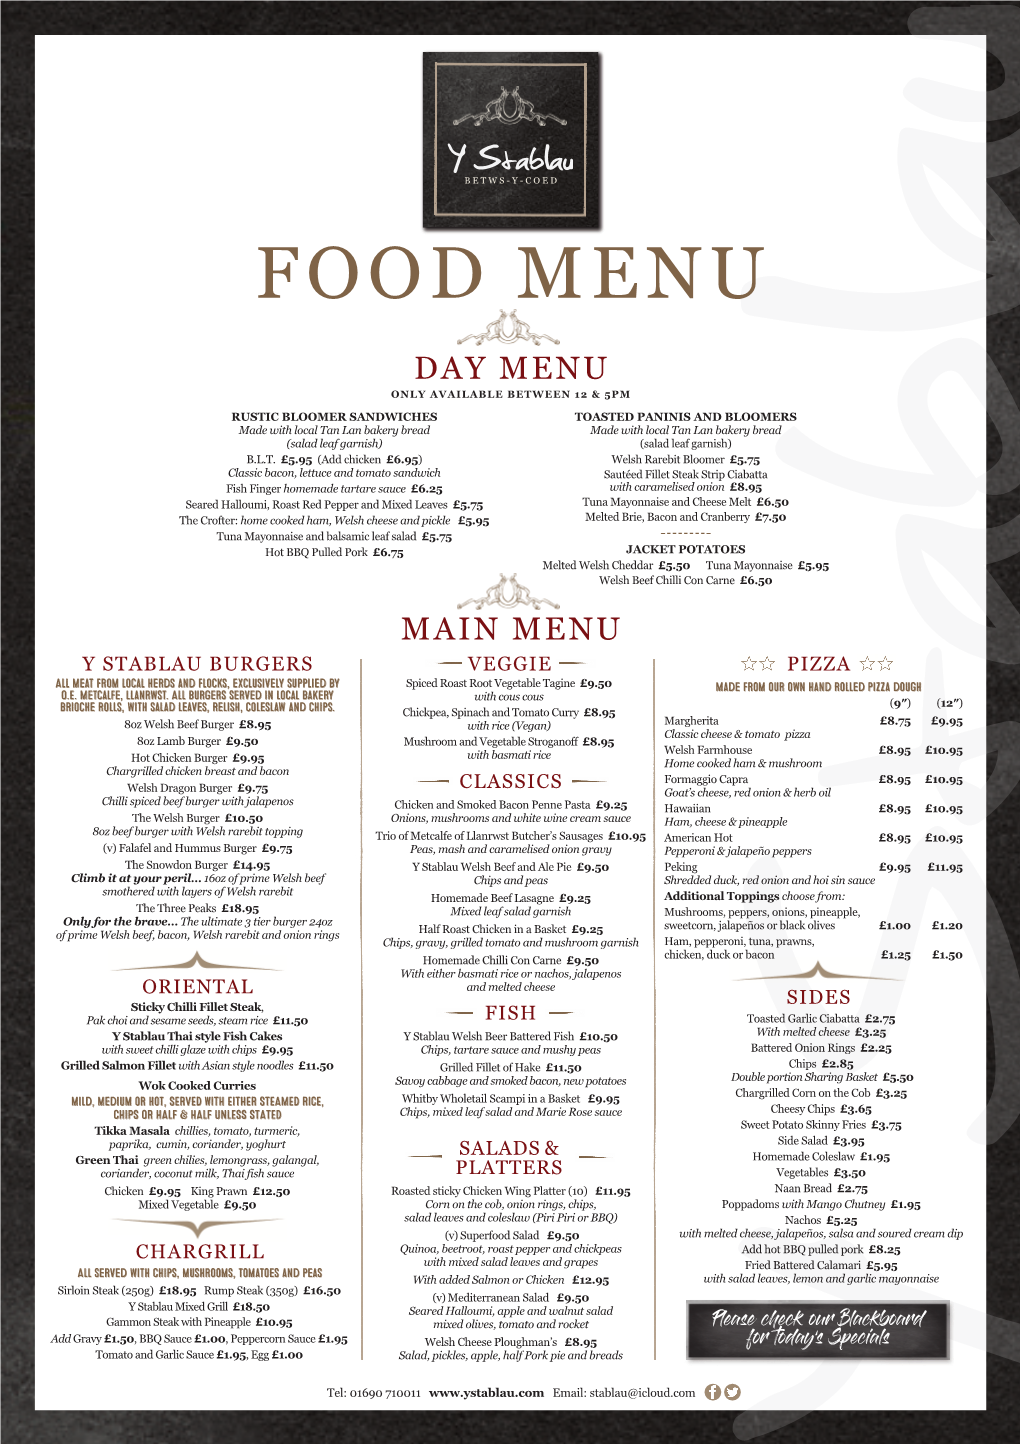 Food Menu Day Menu Only Available Between 12 & 5Pm